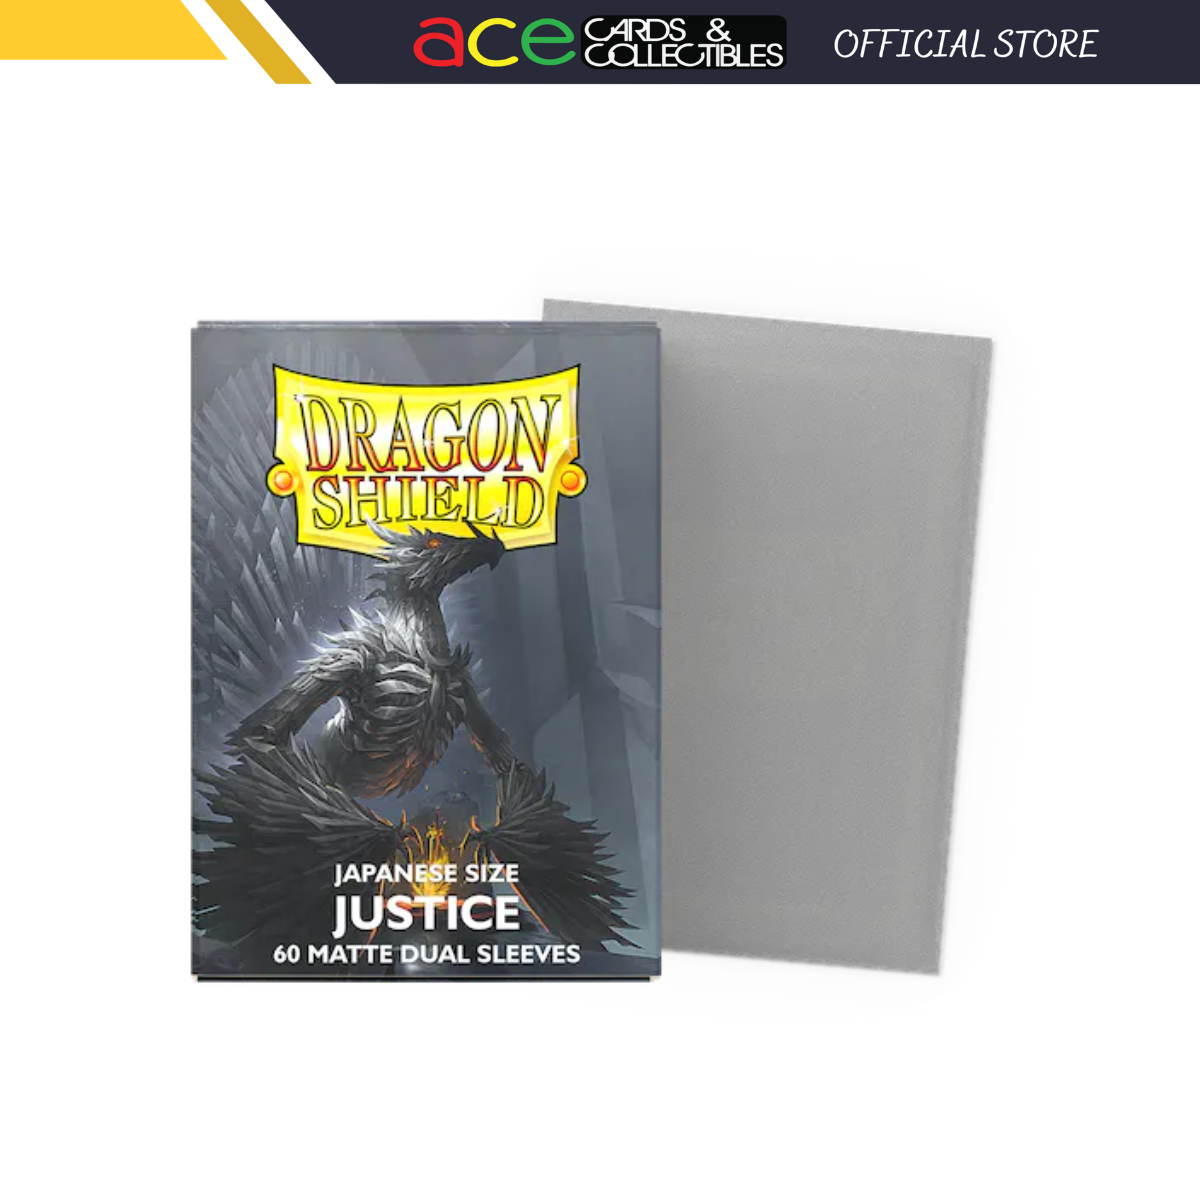 Dragon Shield Sleeve DS60J Matte DUAL Japanese size - Justice-Dragon Shield-Ace Cards & Collectibles